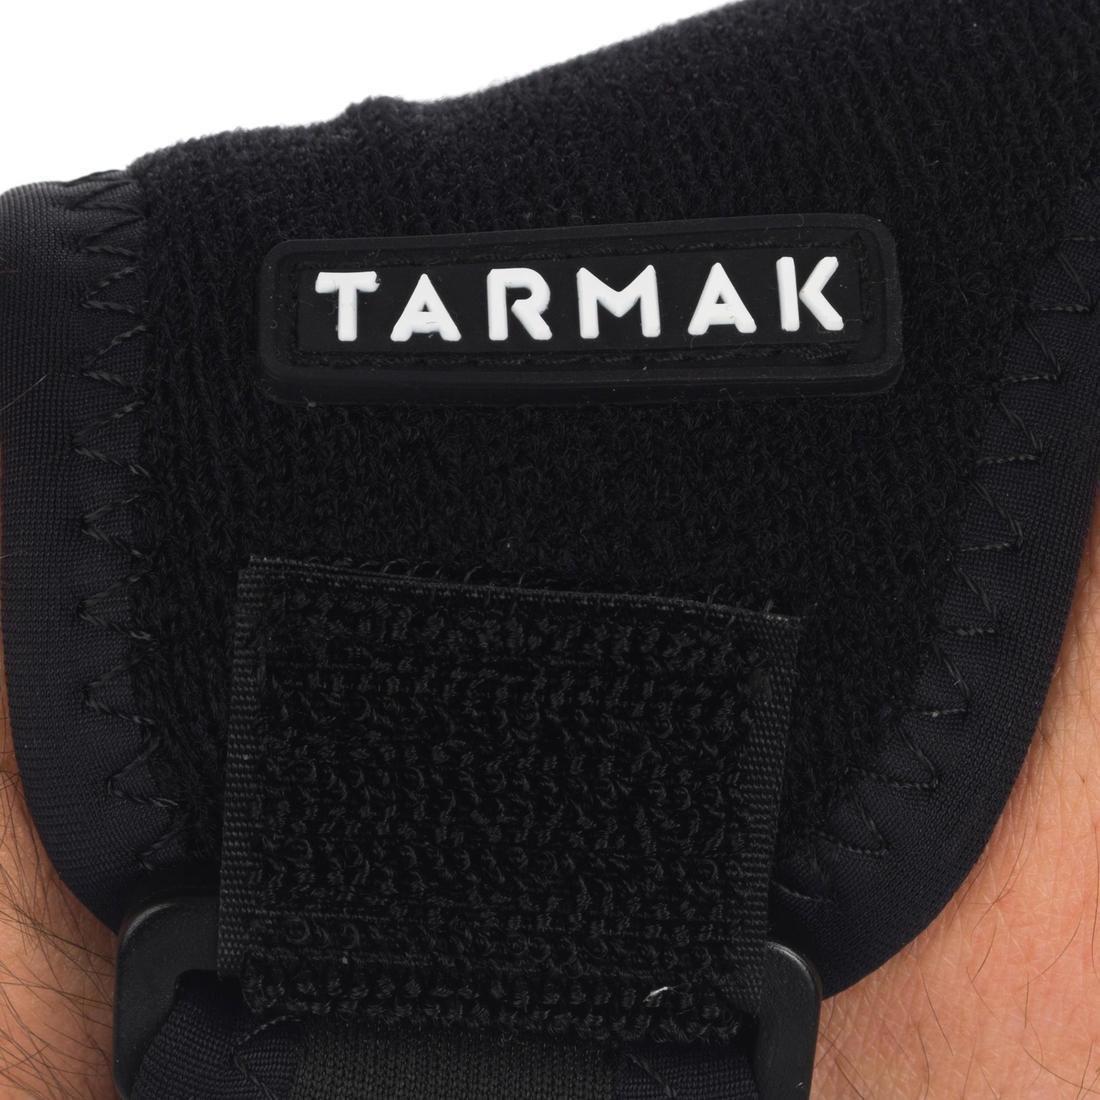 TARMAK - Strong 700 Left/Right Thumb Support, Black